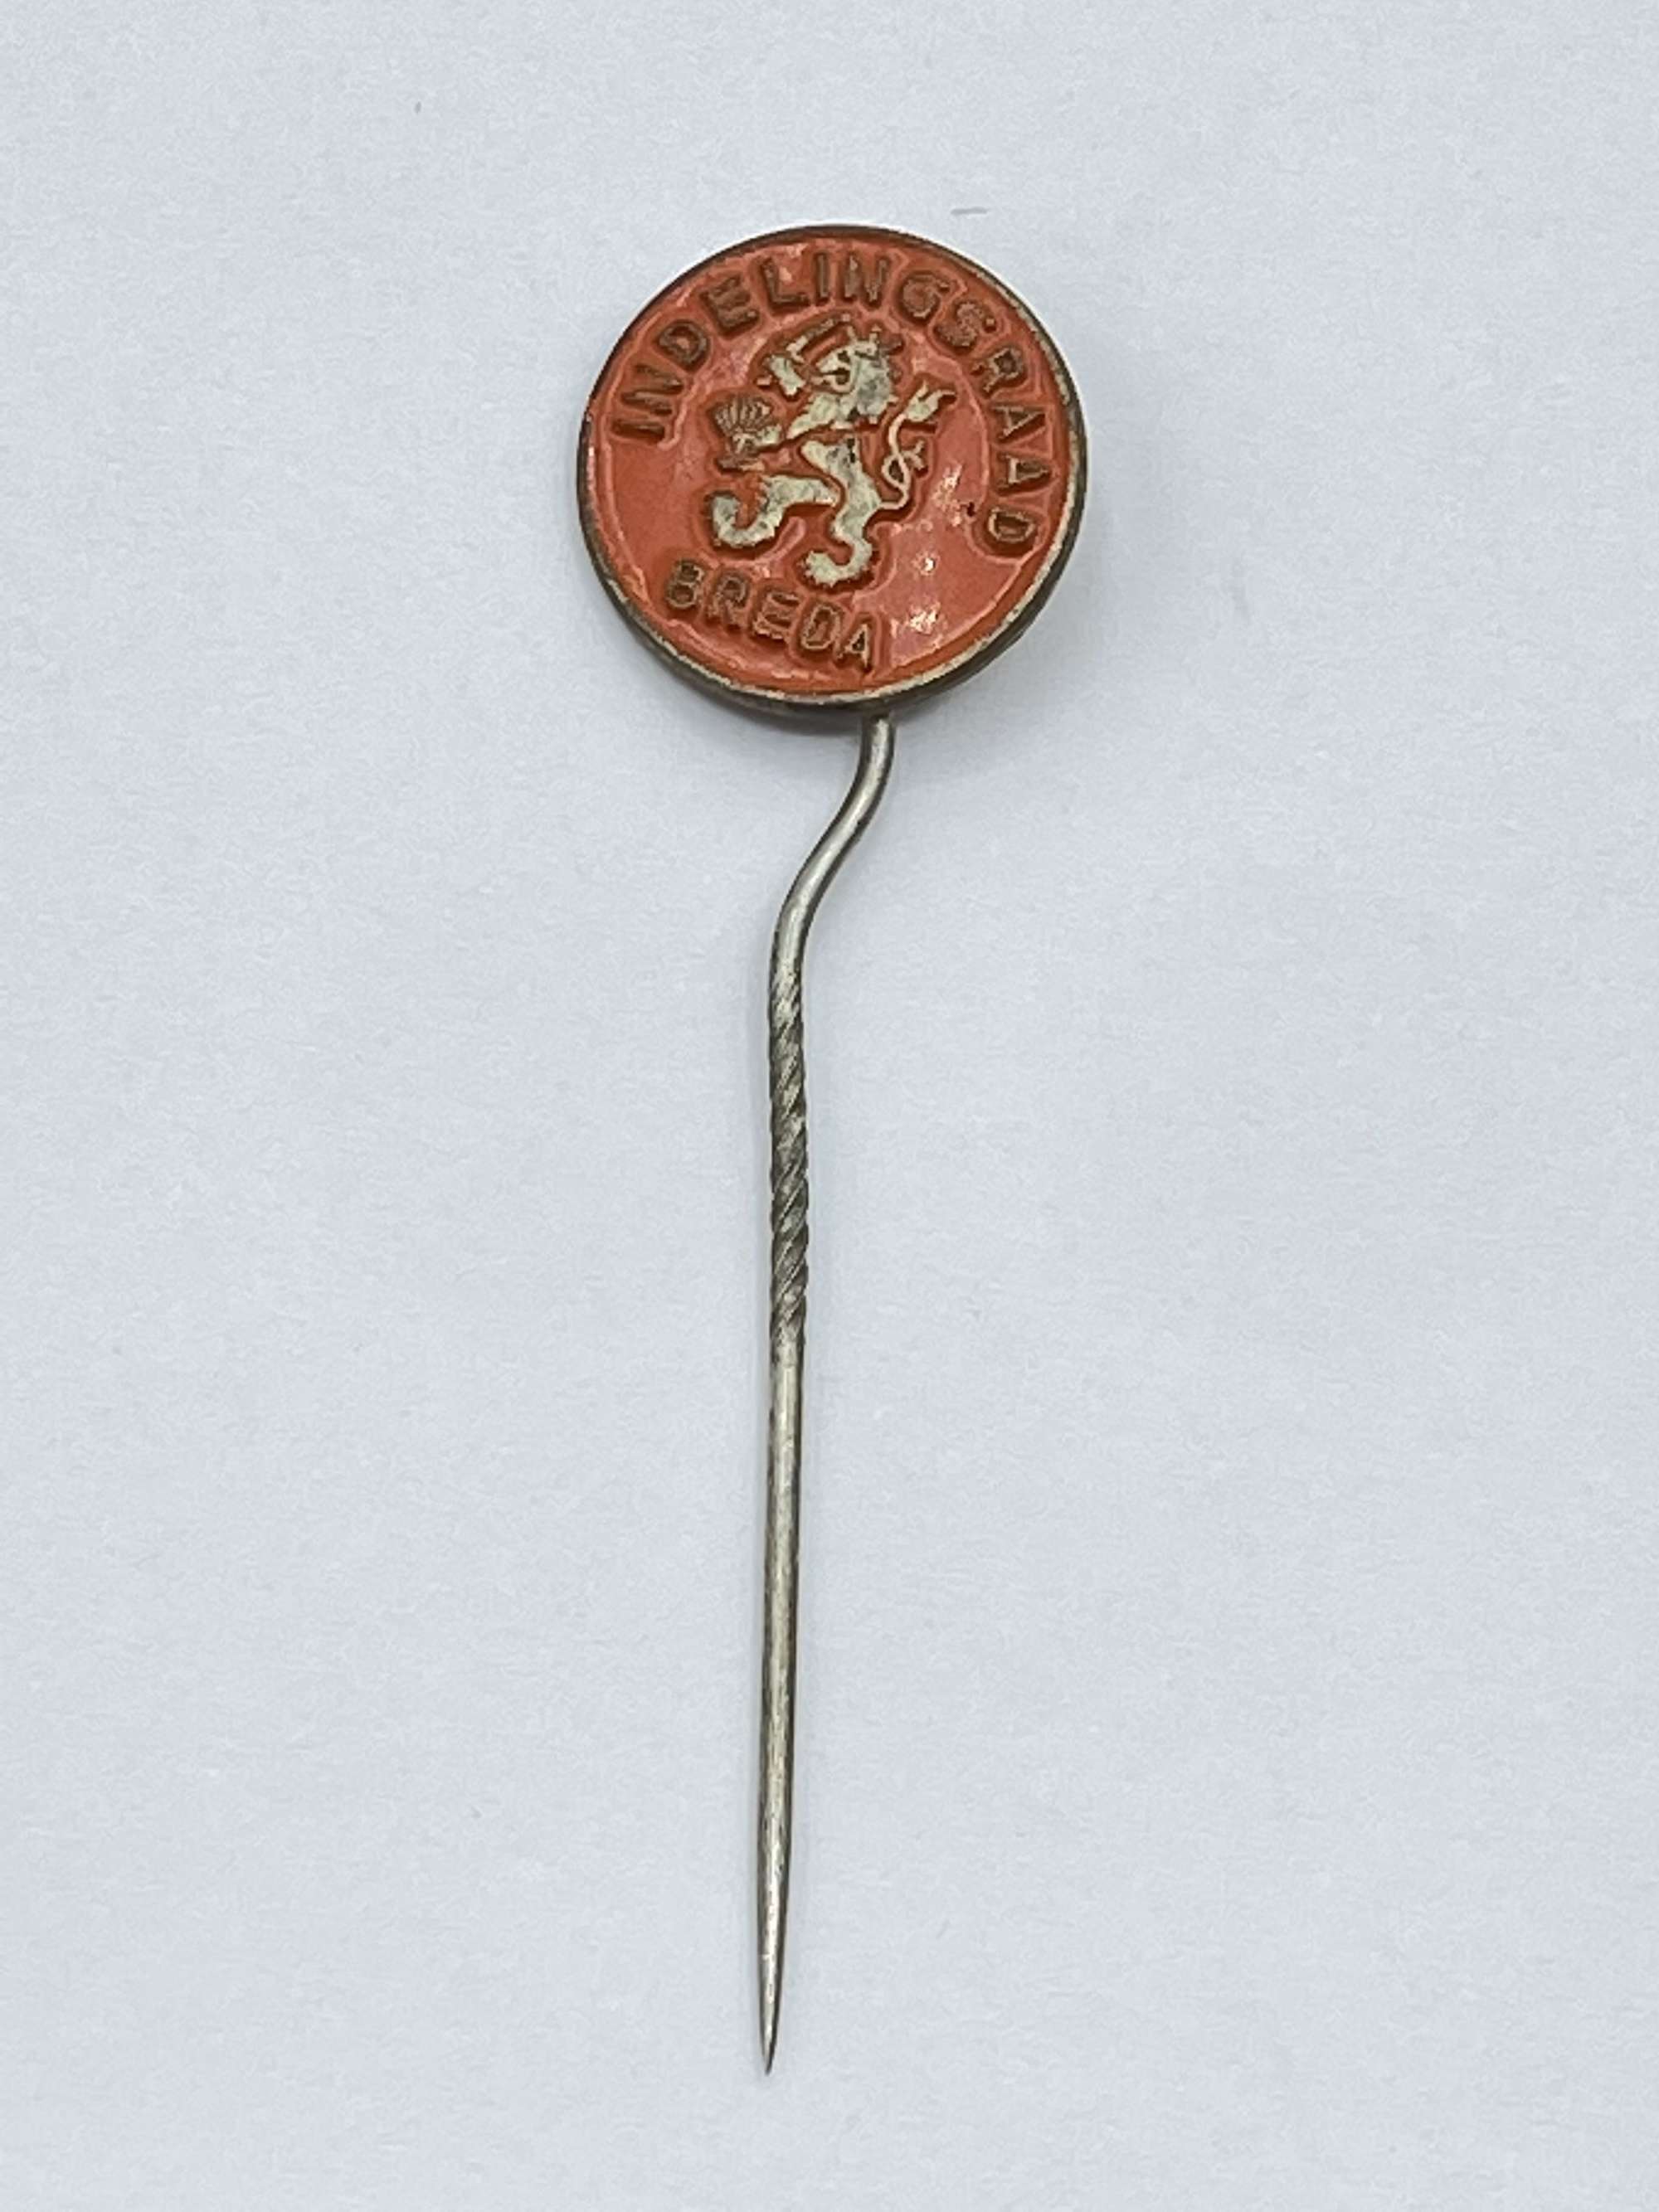 1968 Indelingsraad Division Council Breda Netherland Army Stick Pin